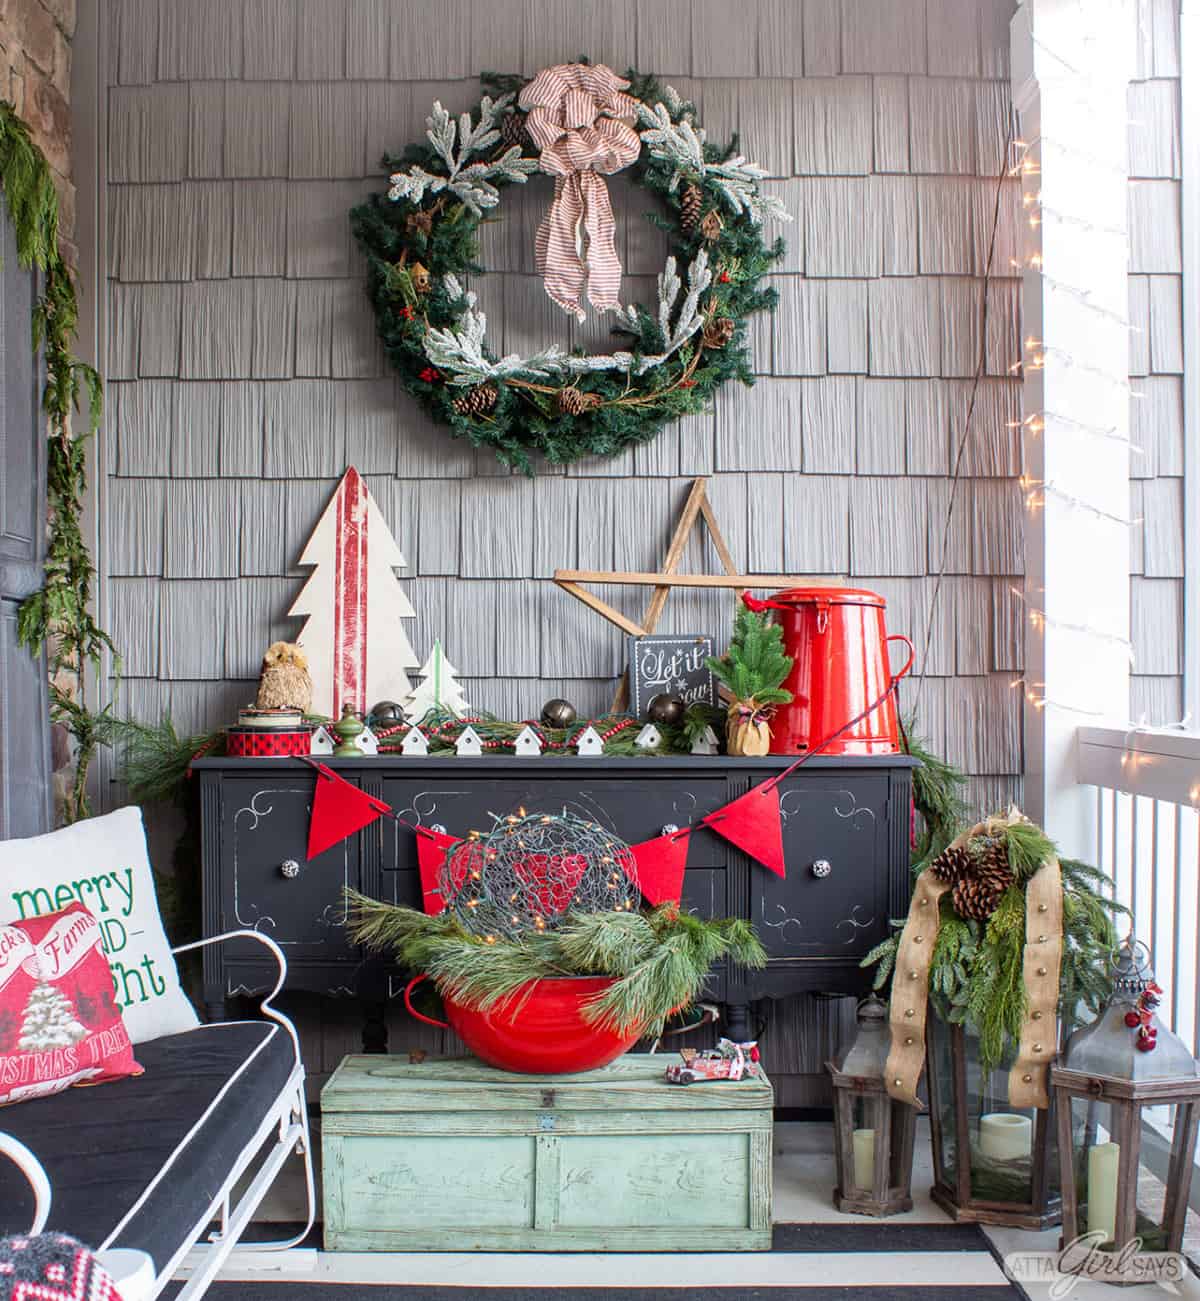 Vintage Christmas porch with red and black decorations in a porch Christmas tree theme.